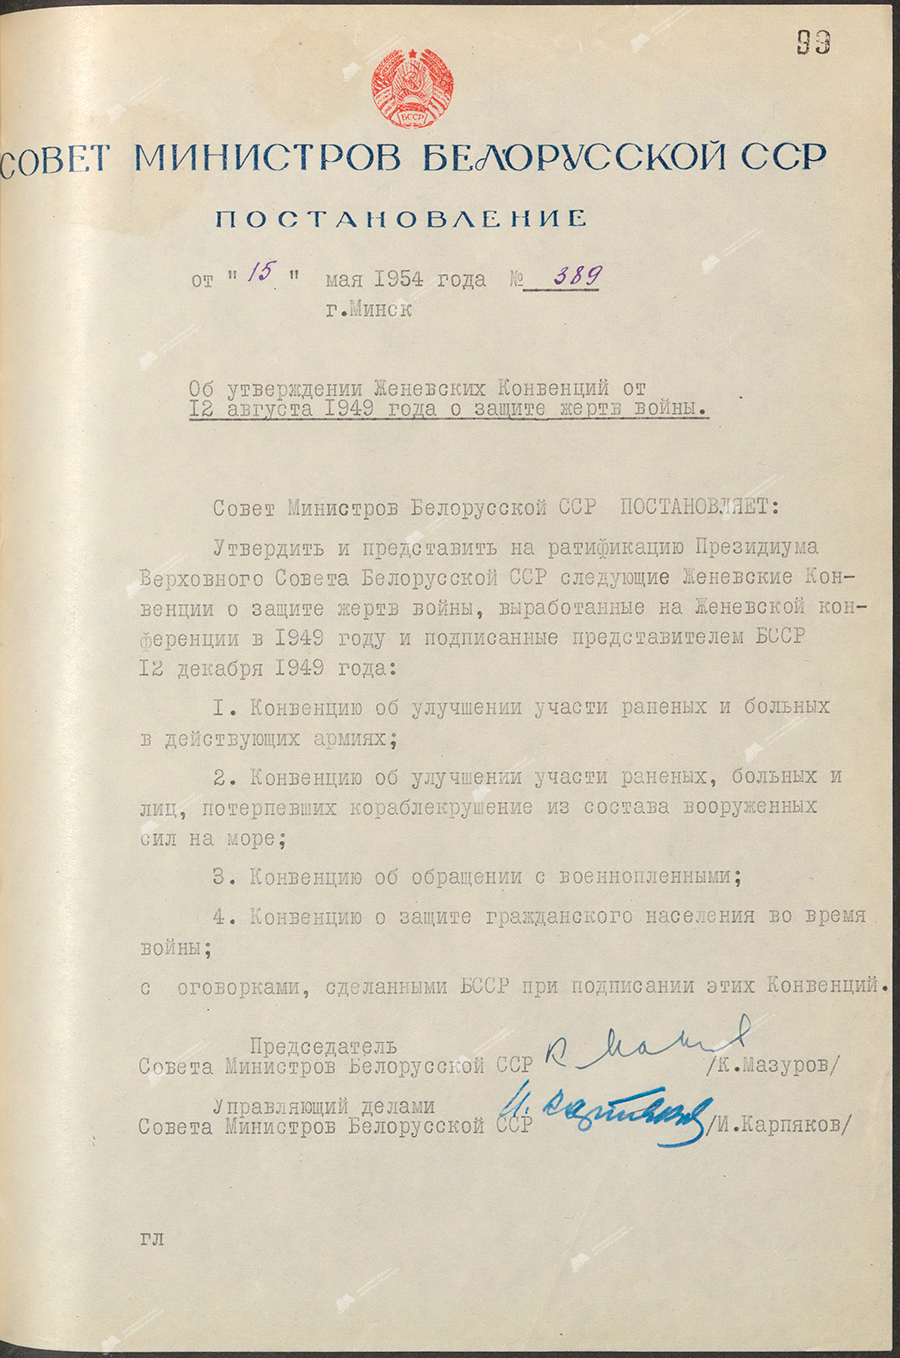 Resolution No. 389 of the Council of Ministers of the Byelorussian SSR «On approval of the Geneva Conventions of August 12, 1949 for the protection of war victims»-с. 0